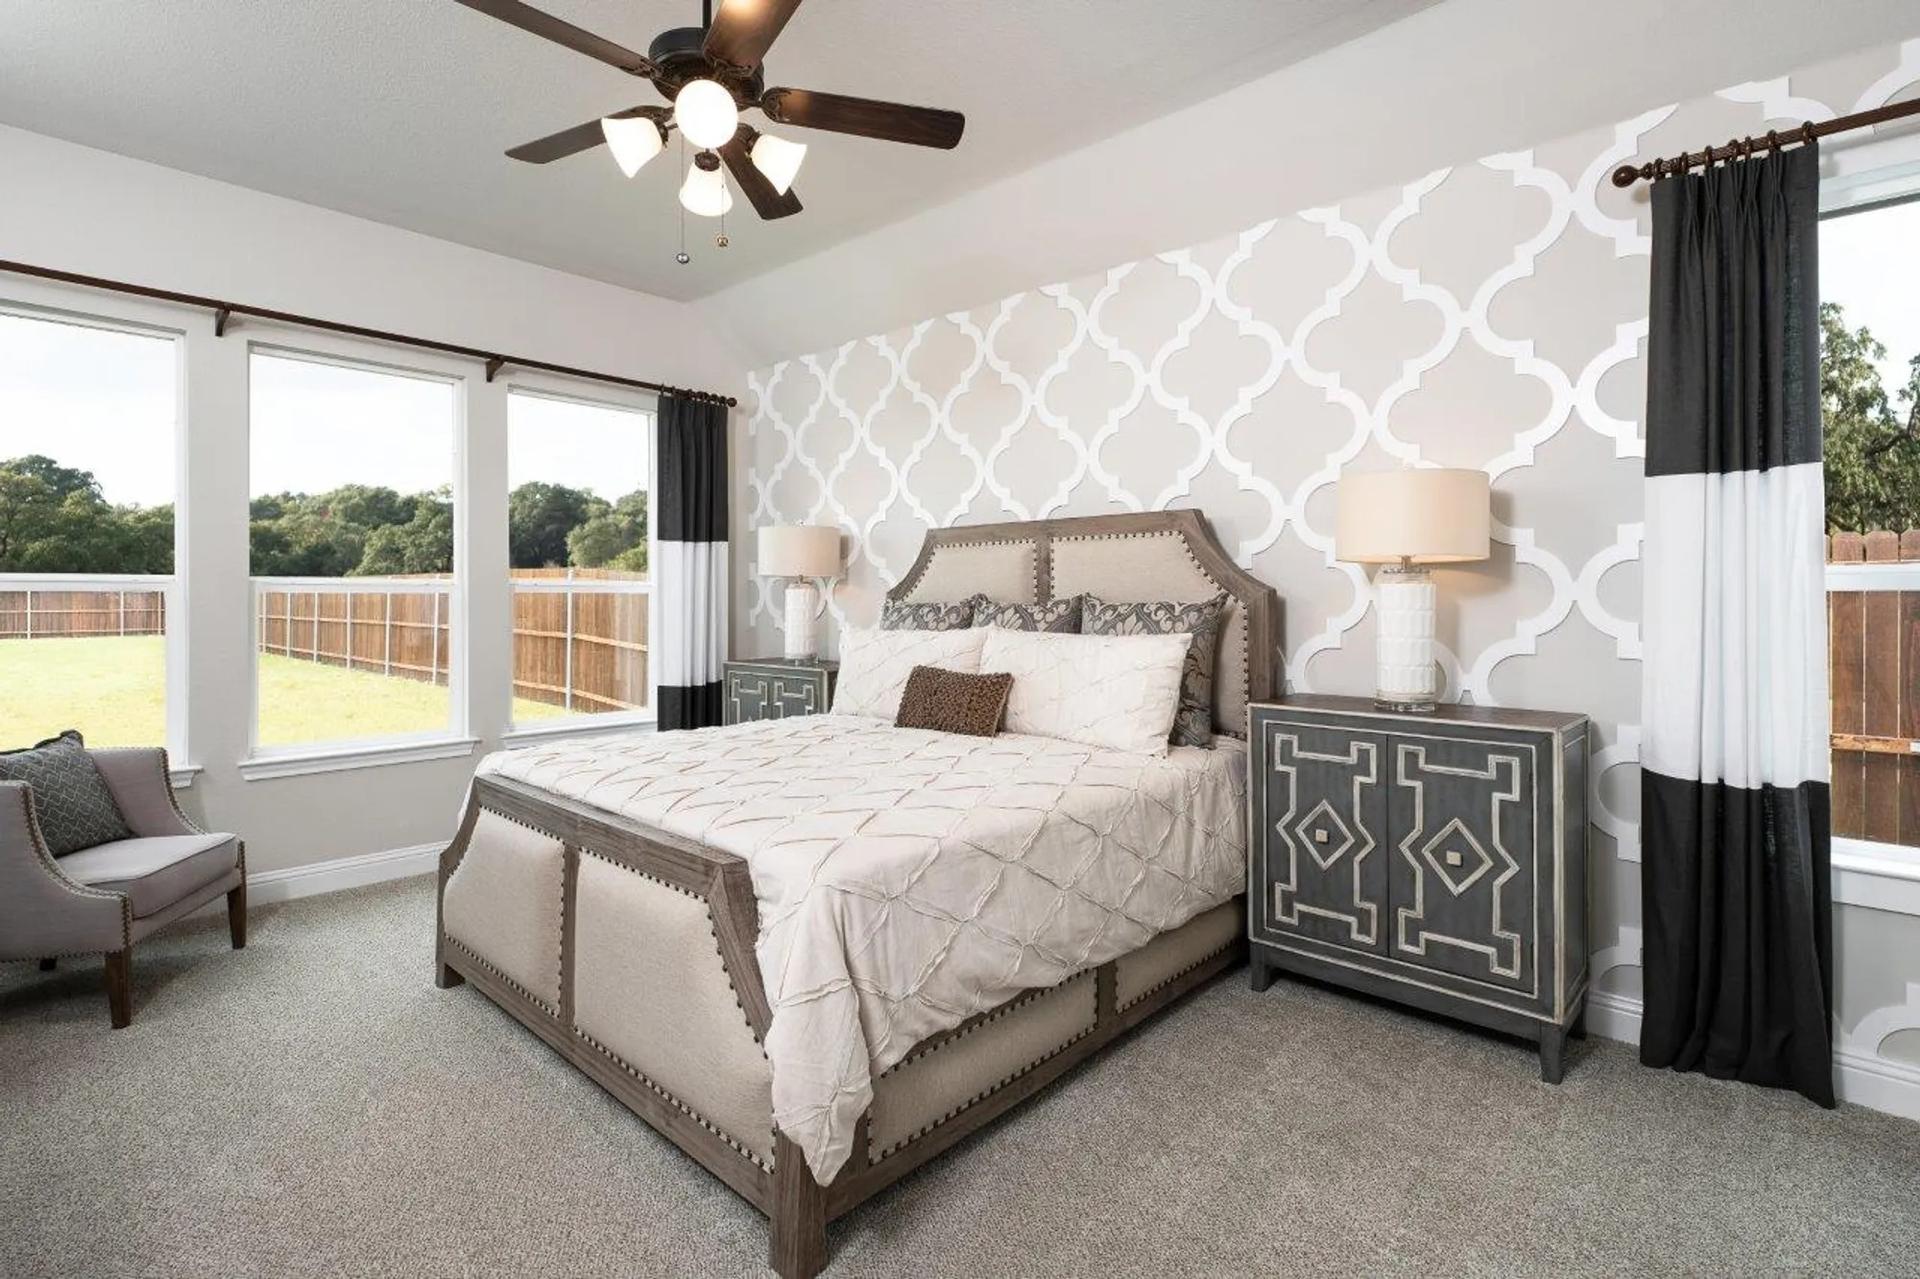 Villages of Walnut Grove New Homes in Midlothian, TX